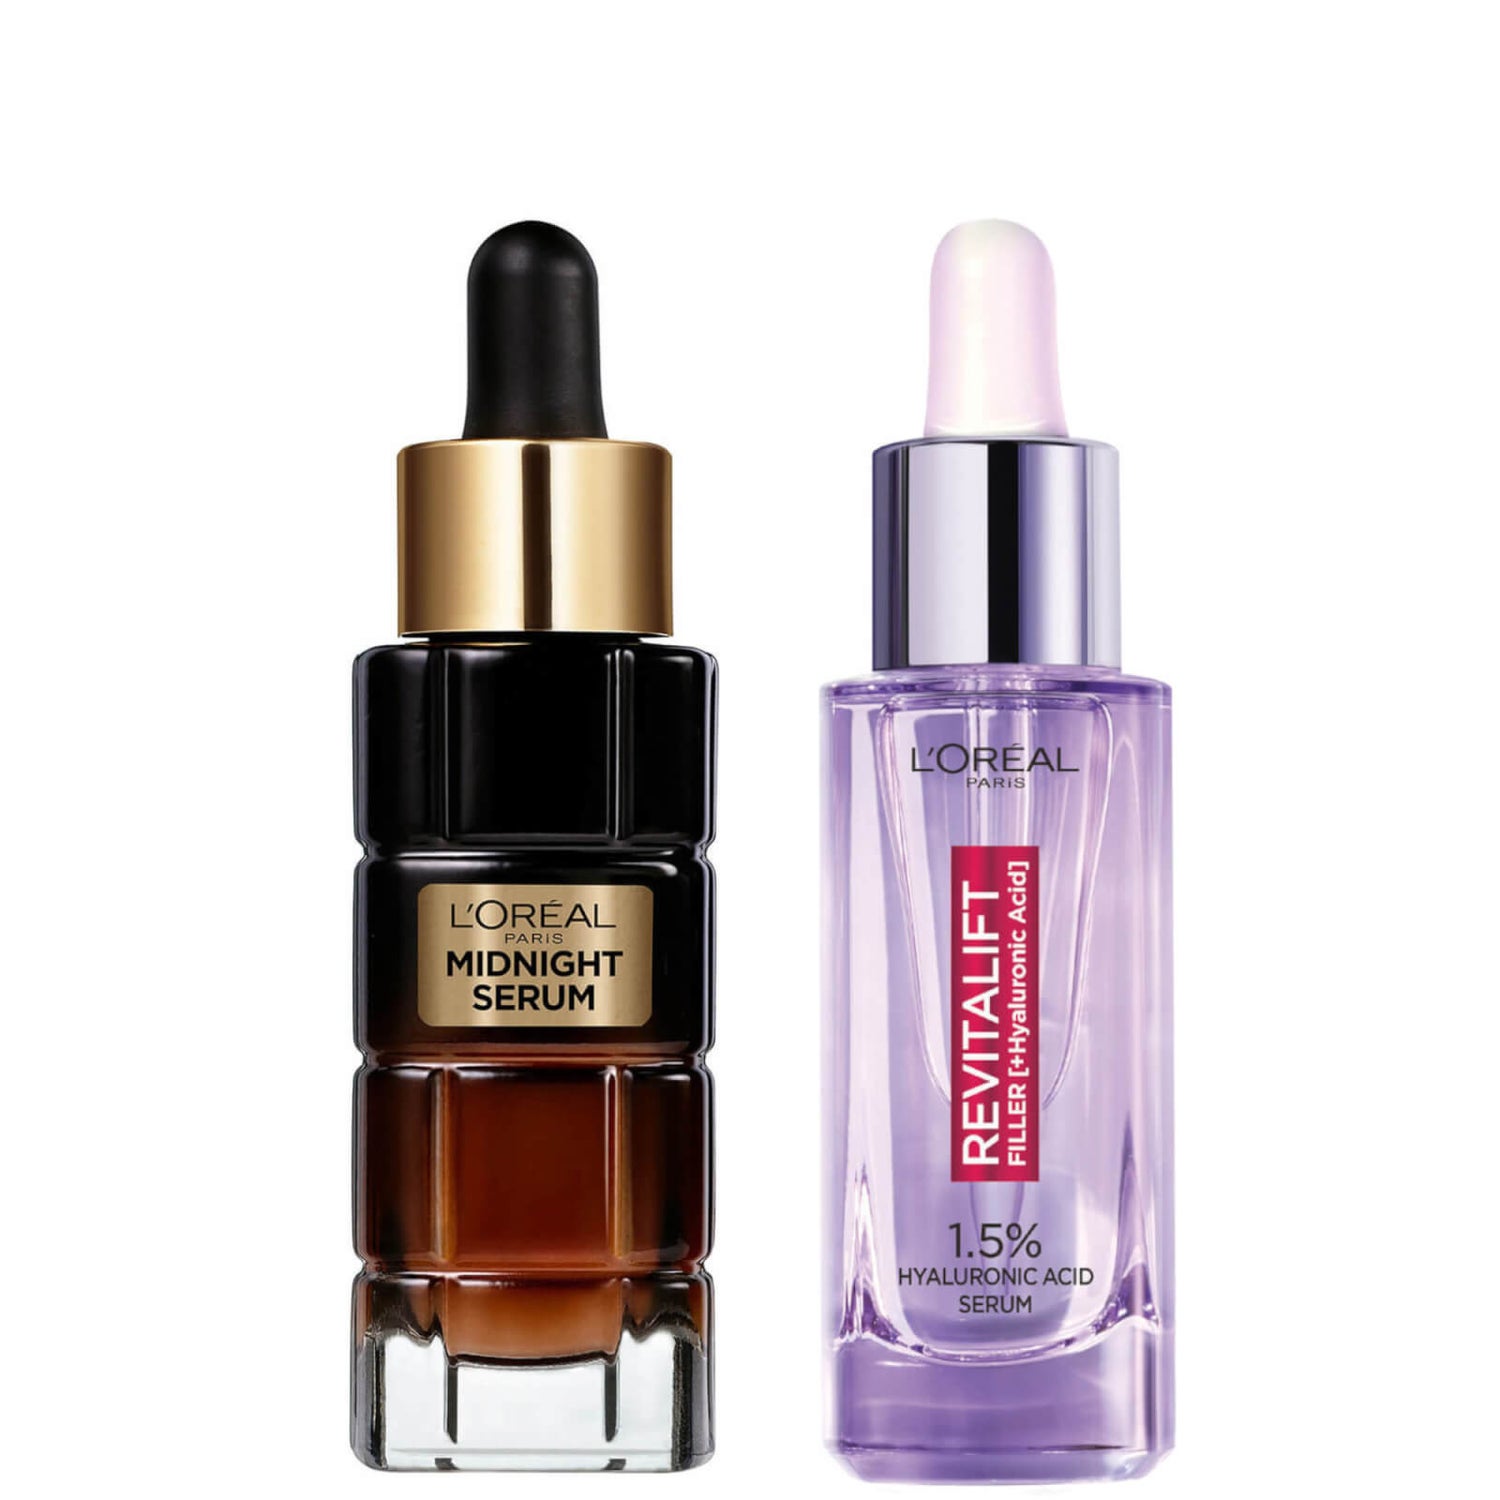 L'Oréal Paris Plump and Glow Serums Bundle with 1.5% Hyaluronic Acid, Vitamin E and Anti-Oxidants